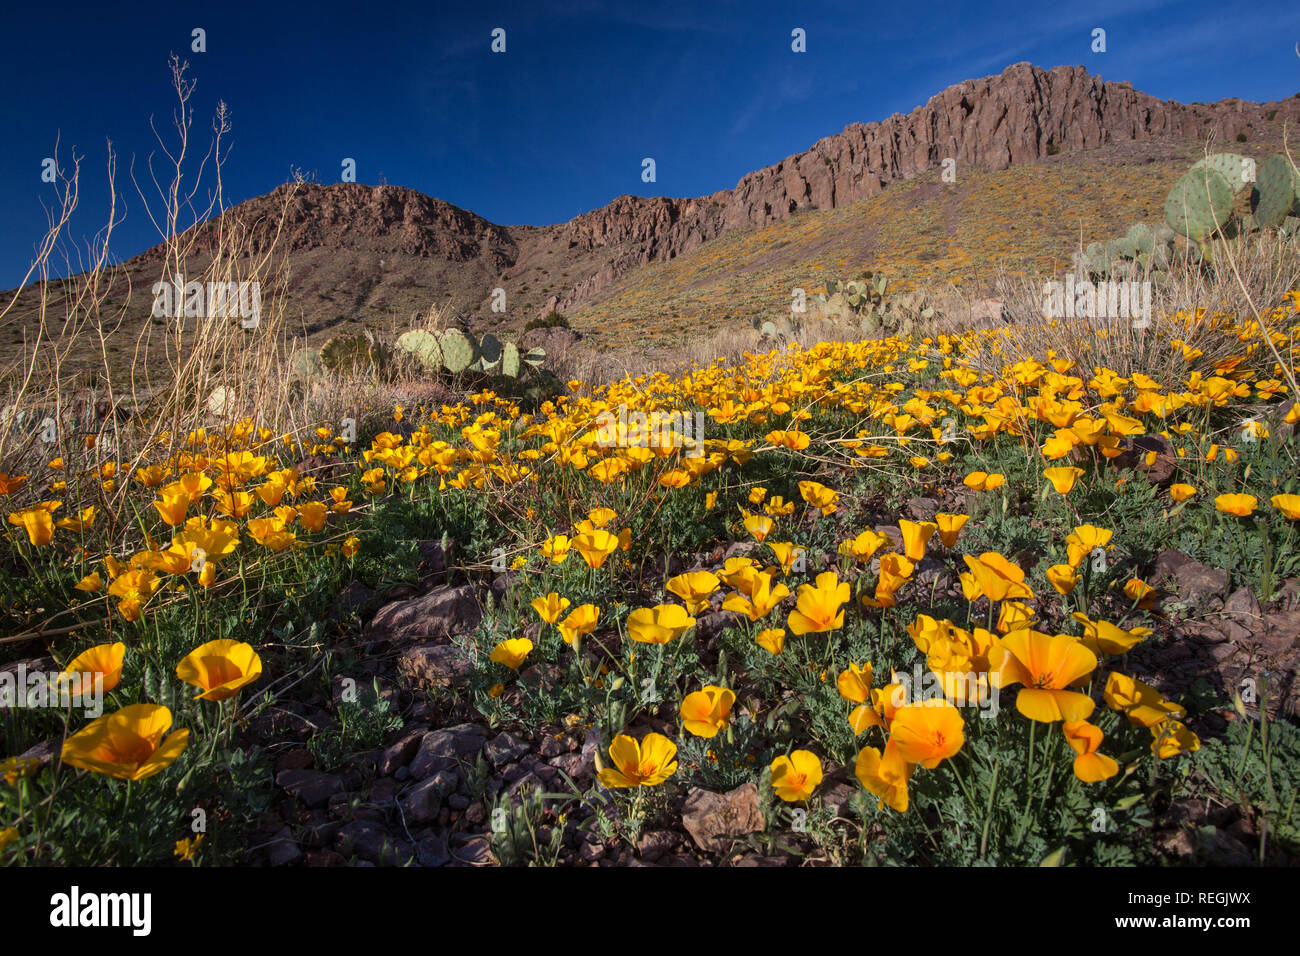 Wildflowers surround craggy mountains near Deming, New Mexico Stock Photo